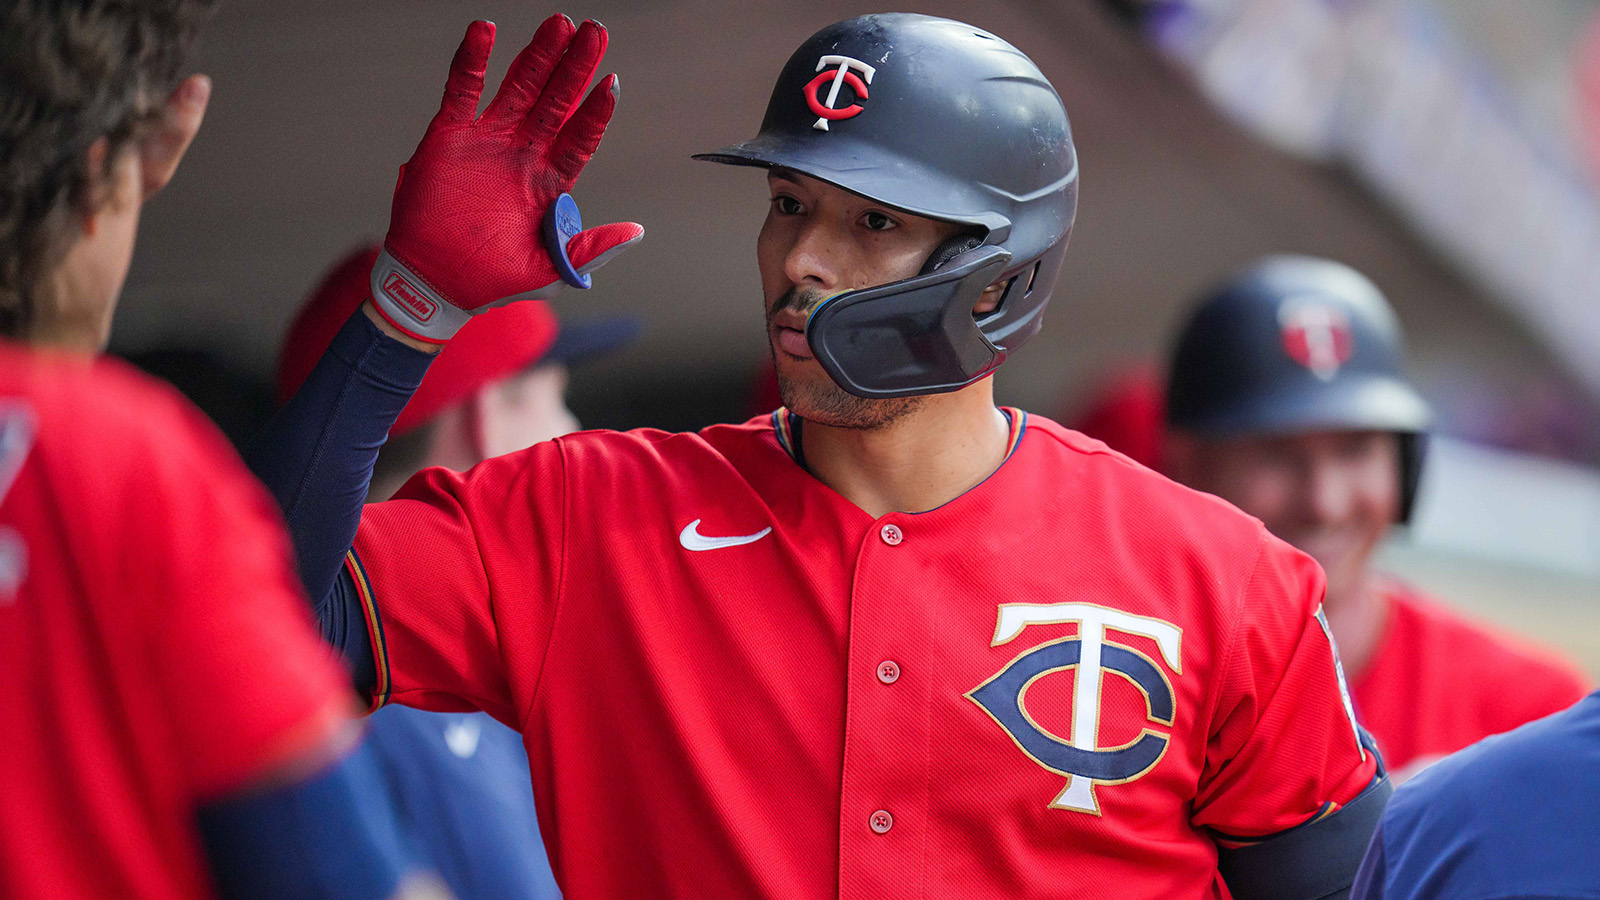 Watch Carlos Correa's press conference with the Twins here